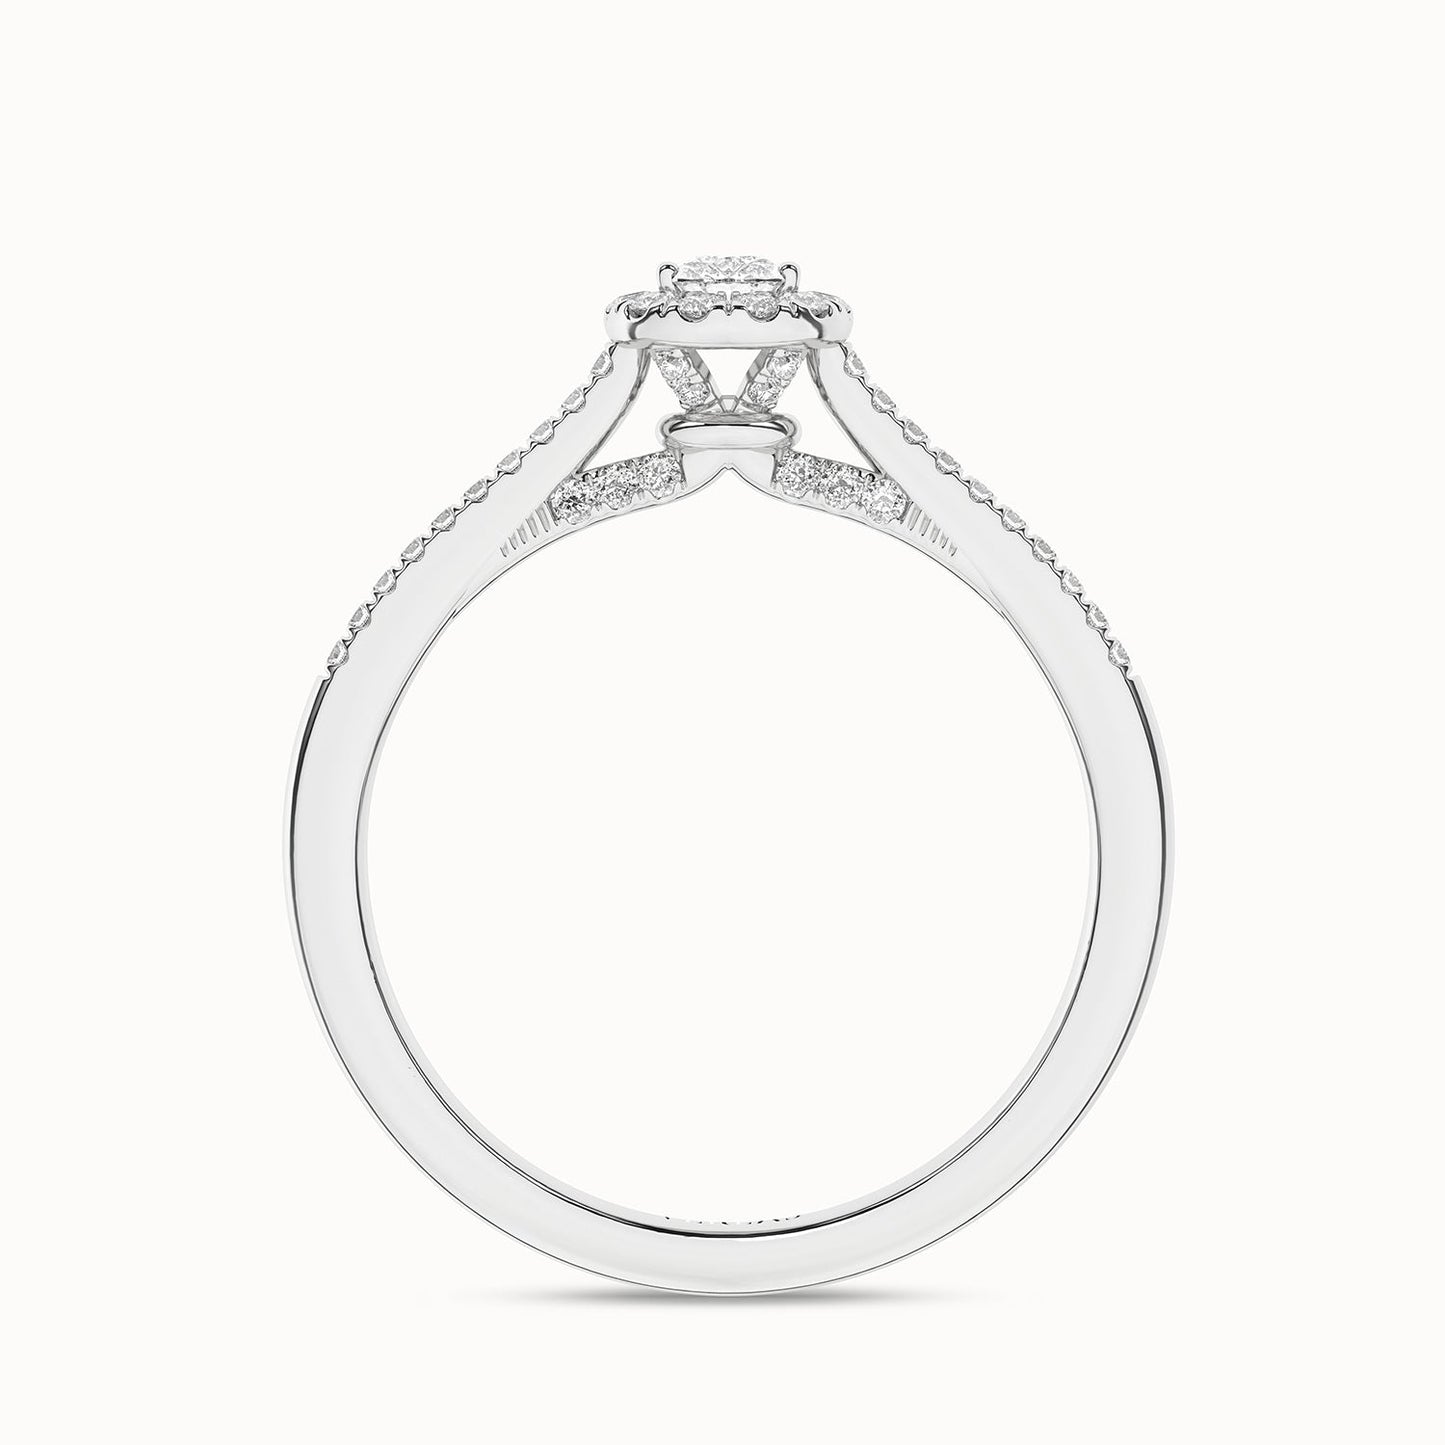 Signature Dewdrop Halo Ring_Product Angle_1/3Ct - 2